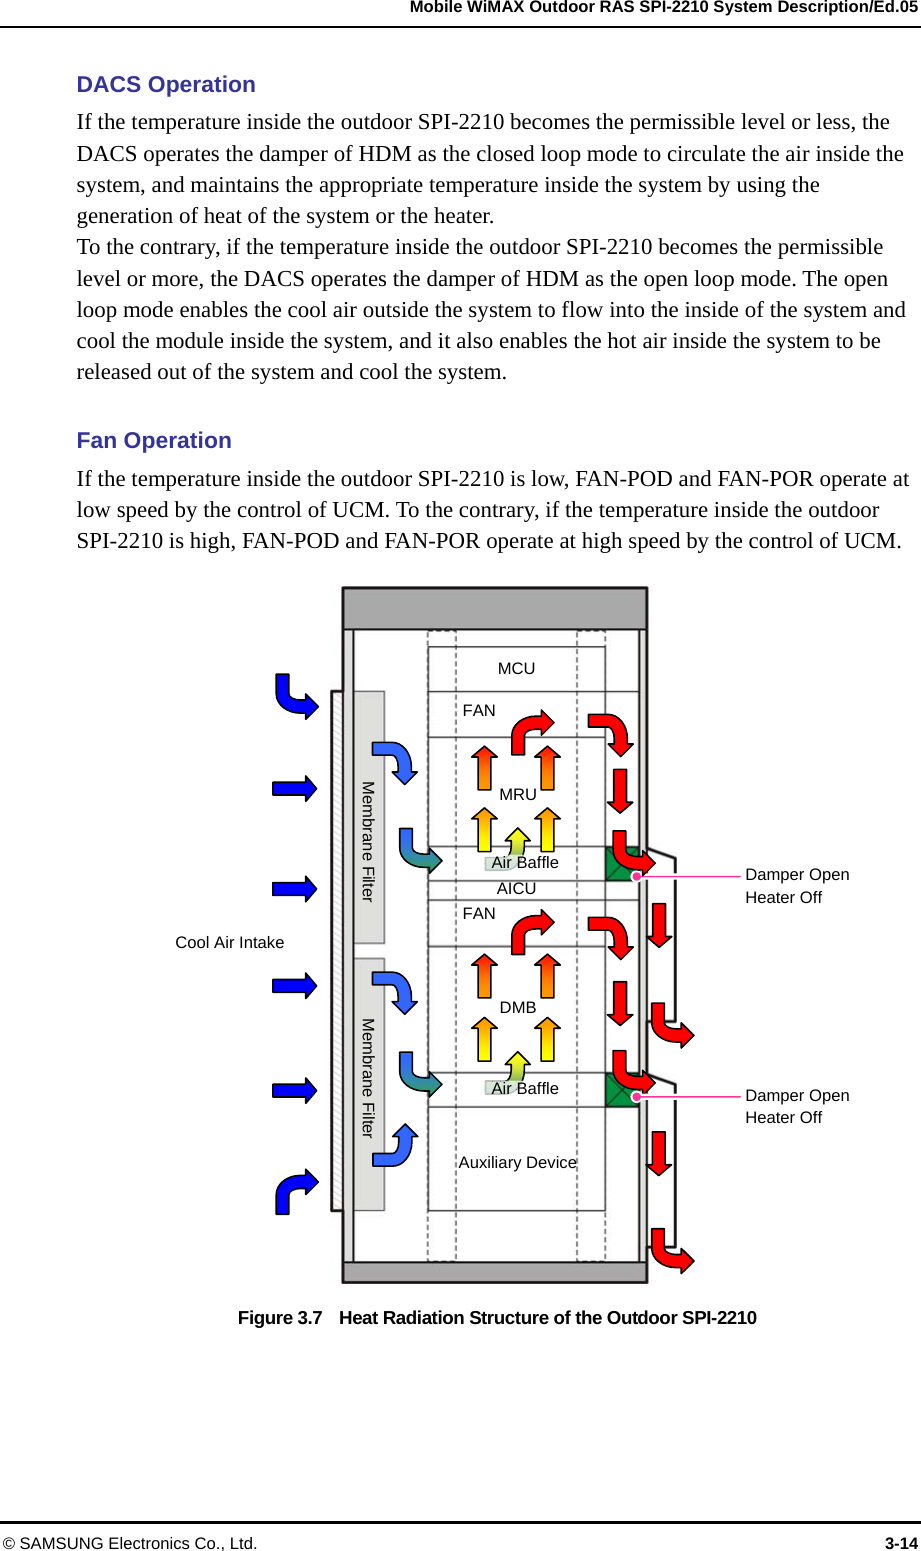   Mobile WiMAX Outdoor RAS SPI-2210 System Description/Ed.05 © SAMSUNG Electronics Co., Ltd.  3-14 DACS Operation If the temperature inside the outdoor SPI-2210 becomes the permissible level or less, the DACS operates the damper of HDM as the closed loop mode to circulate the air inside the system, and maintains the appropriate temperature inside the system by using the generation of heat of the system or the heater. To the contrary, if the temperature inside the outdoor SPI-2210 becomes the permissible level or more, the DACS operates the damper of HDM as the open loop mode. The open loop mode enables the cool air outside the system to flow into the inside of the system and cool the module inside the system, and it also enables the hot air inside the system to be released out of the system and cool the system.  Fan Operation If the temperature inside the outdoor SPI-2210 is low, FAN-POD and FAN-POR operate at low speed by the control of UCM. To the contrary, if the temperature inside the outdoor SPI-2210 is high, FAN-POD and FAN-POR operate at high speed by the control of UCM.  Figure 3.7    Heat Radiation Structure of the Outdoor SPI-2210  Cool Air Intake MCU Air Baffle MRU FAN AICU Air Baffle DMB FAN Damper Open Heater Off Damper Open Heater Off Membrane Filter  Membrane FilterAuxiliary Device 